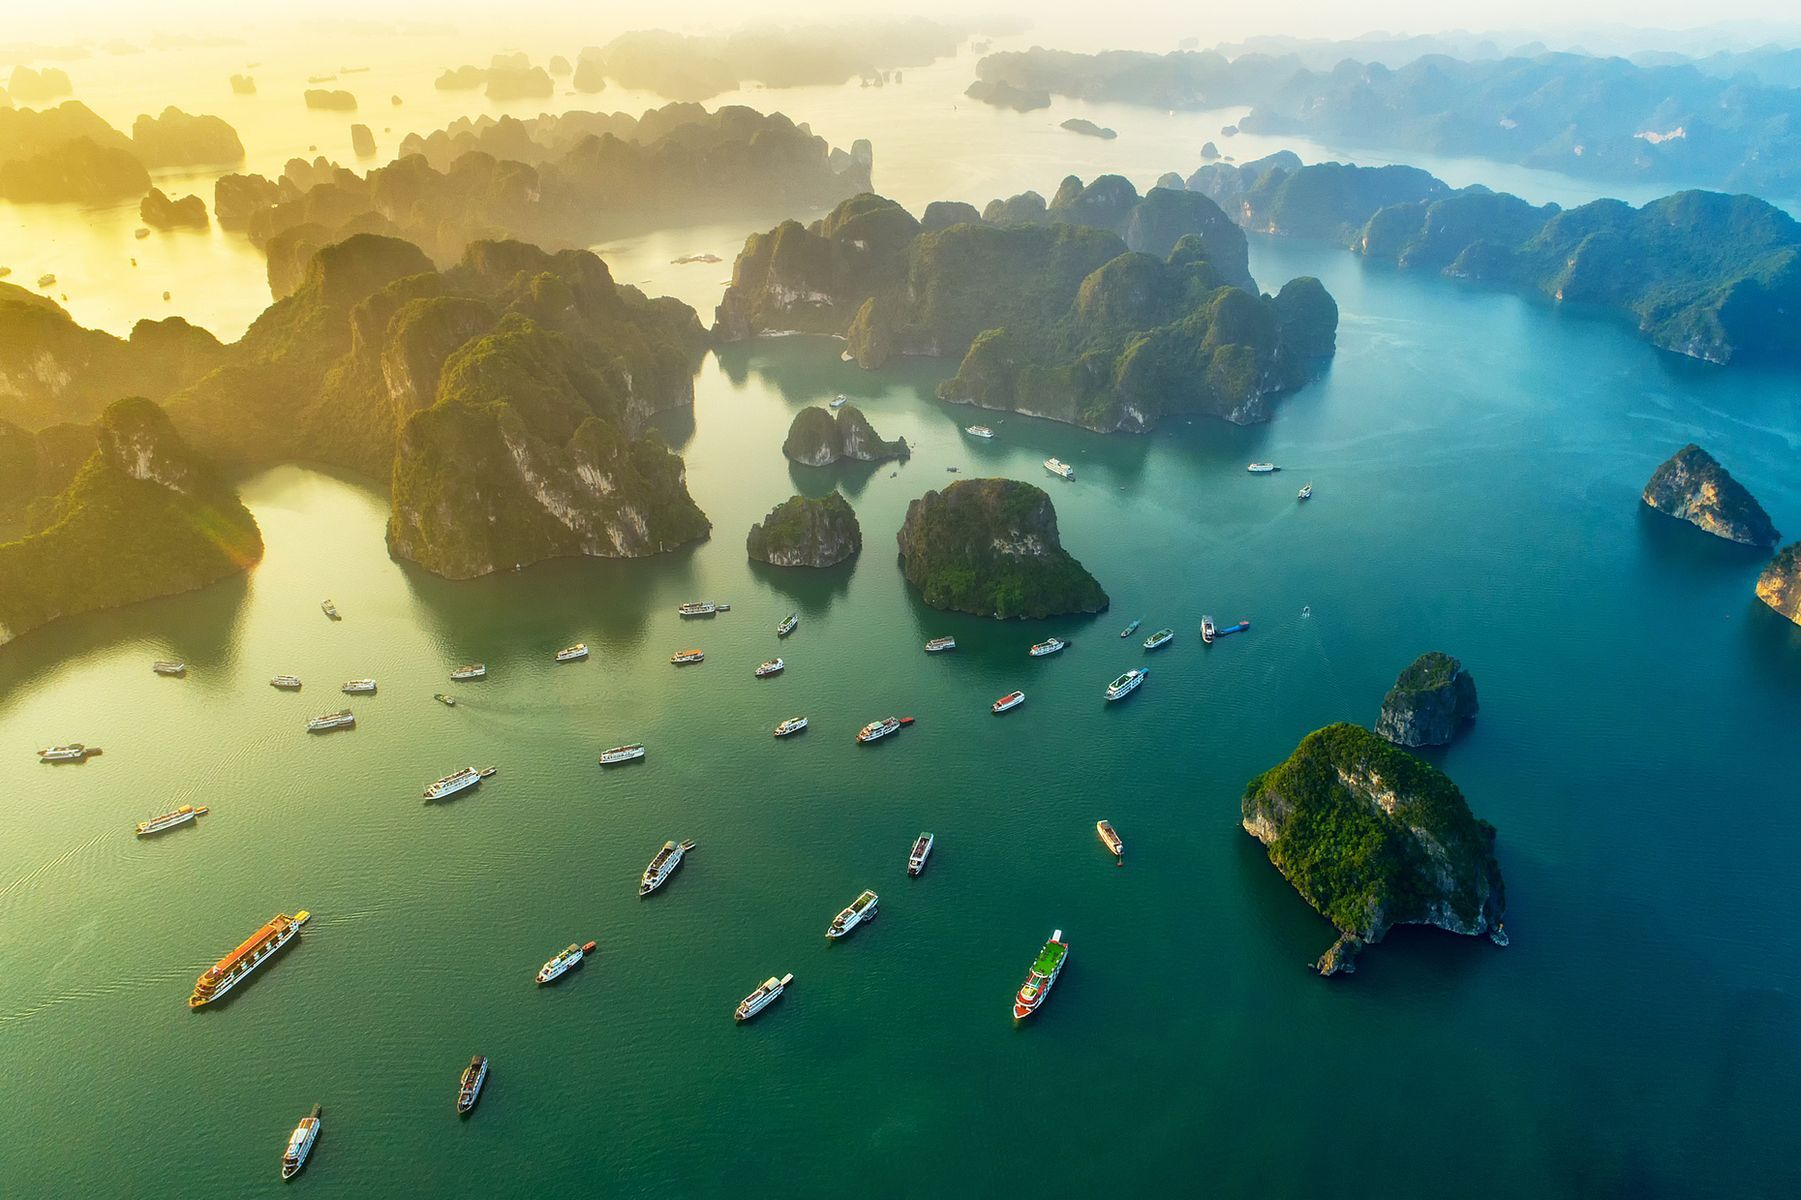 <p>It’s a <a href="https://whc.unesco.org/en/list/672/">UNESCO World Heritage Site</a> famed for its limestone pillars rising from the sea. Ha Long Bay, Vietnam is a popular scuba diving, hiking, and boating destination which hosts more than <a href="https://www.visithalongbay.com/news-updates/halong-bay-tourism-statistics--latest-data.html">11 million</a> tourists a year. However, this is one spot travellers will want to avoid in 2024 as the over-tourism issue is negatively affecting the local community and impacting the environment. <a href="https://www.scmp.com/lifestyle/travel-leisure/article/3222669/why-vietnams-ha-long-bay-under-threat-plastic-pollution-crisis-and-whats-being-done-stop-tourists">Plastic pollution</a> and marine waste such as diesel are damaging the local ecosystem of this beautiful bay. </p>